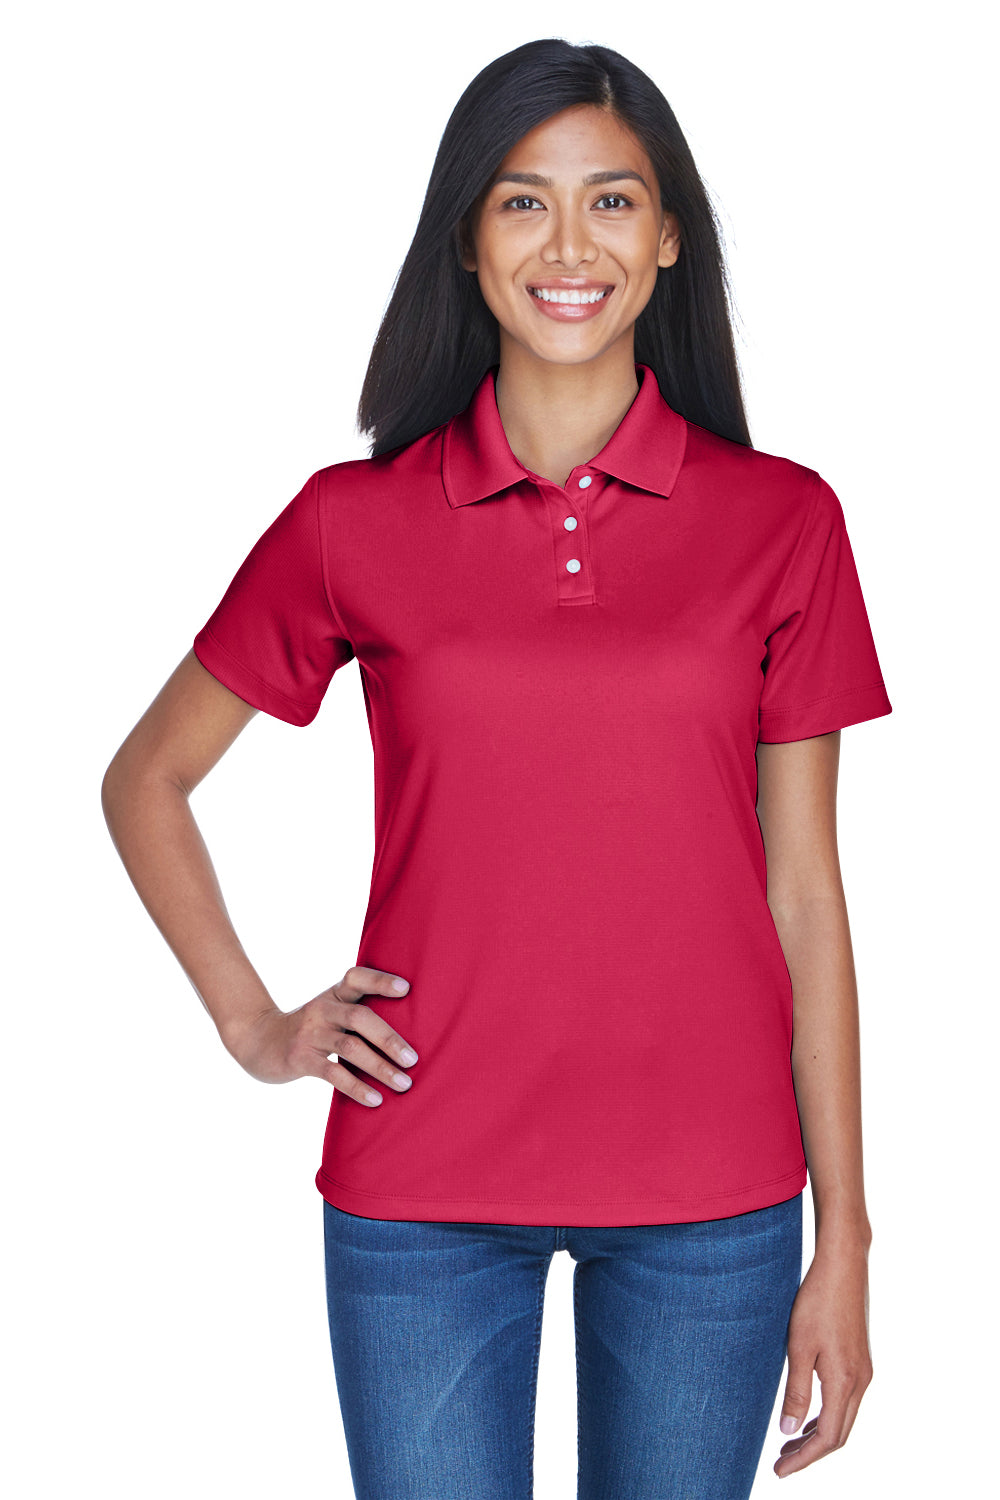 UltraClub 8445L Womens Cool & Dry Performance Moisture Wicking Short Sleeve Polo Shirt Cardinal Red Front